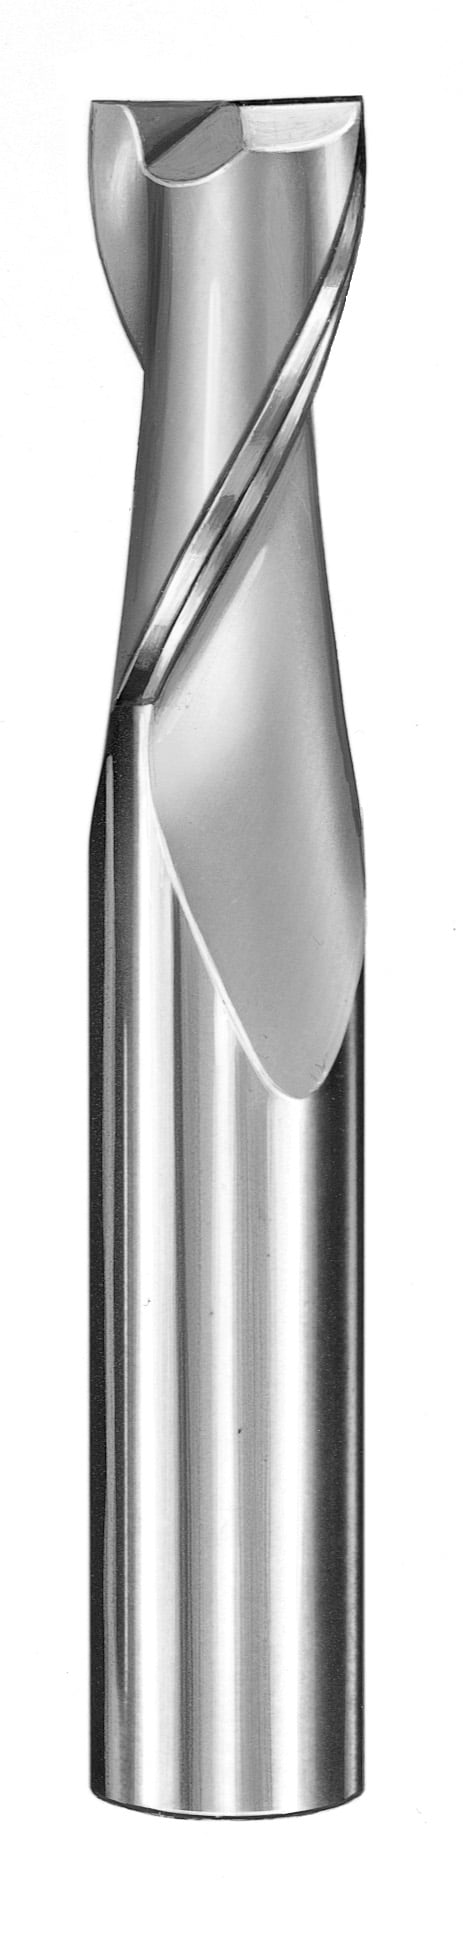 3/16" Dia, 2 Flute, Square End End Mill - 91274